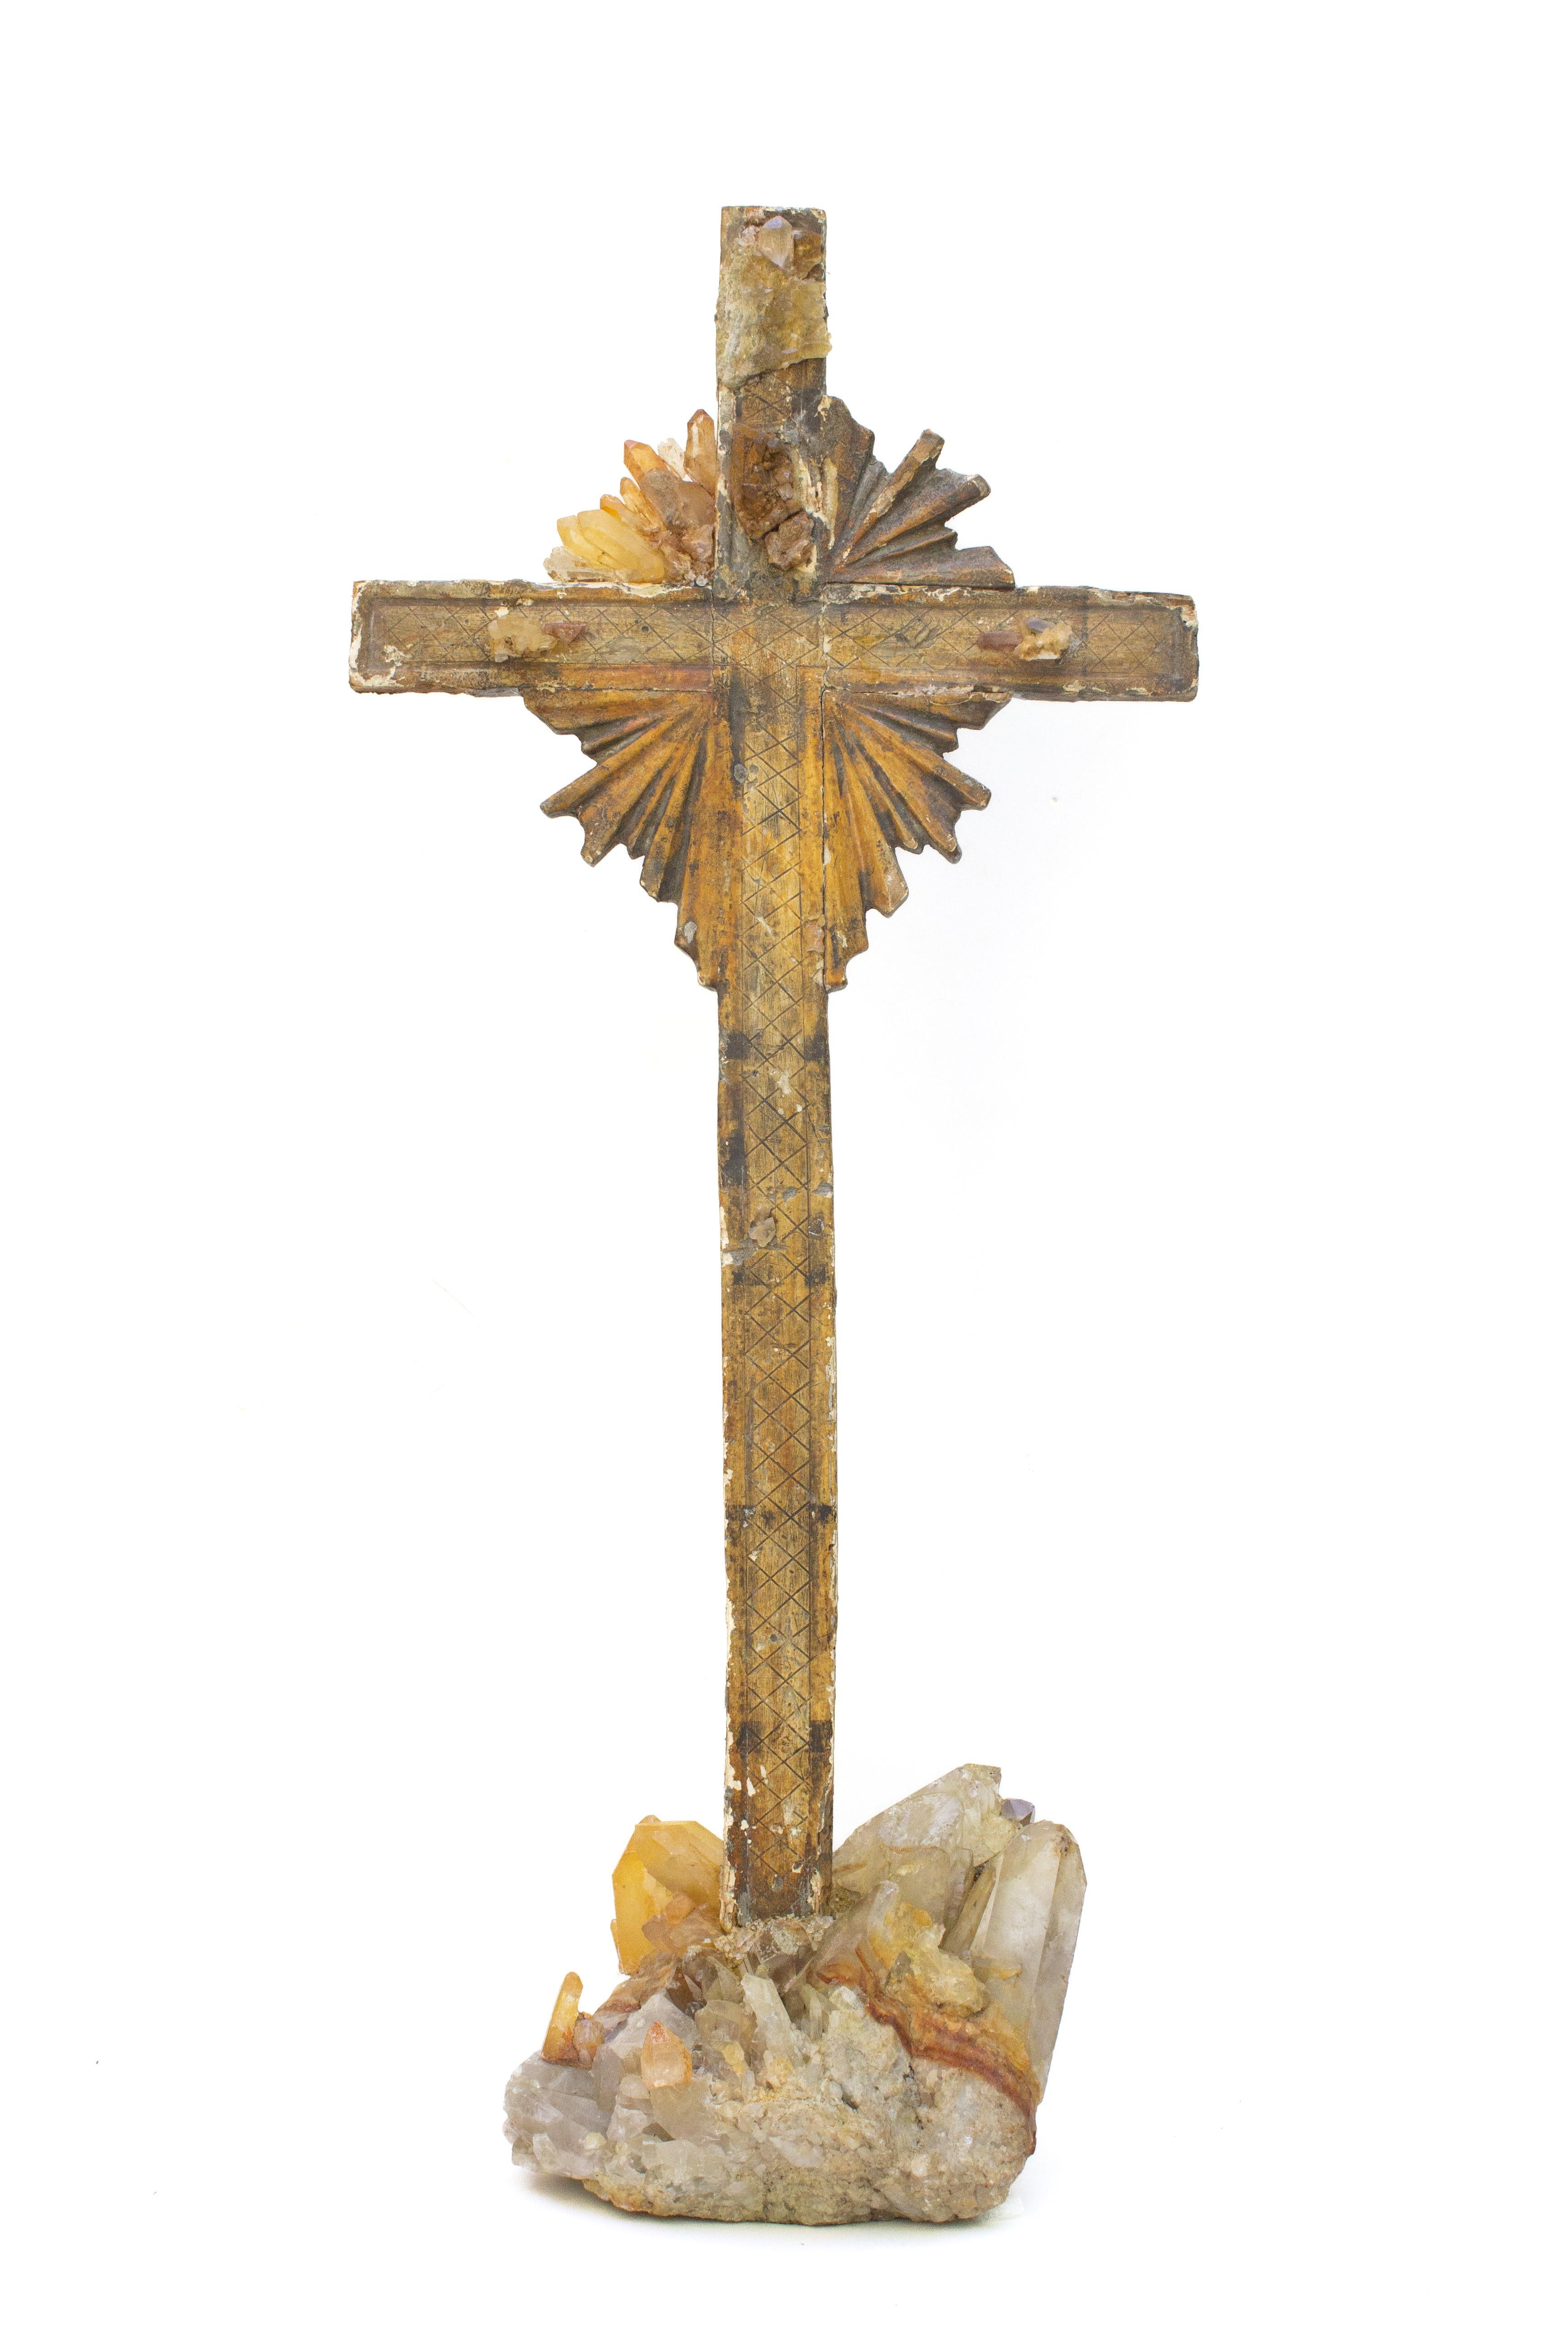 18th century Italian cross adorned with tangerine quartz crystals on a tangerine quartz and crystal cluster base. The crucifix originally came from a church in Tuscany. The crystal quartz points replicate the original sunrays or halo around the